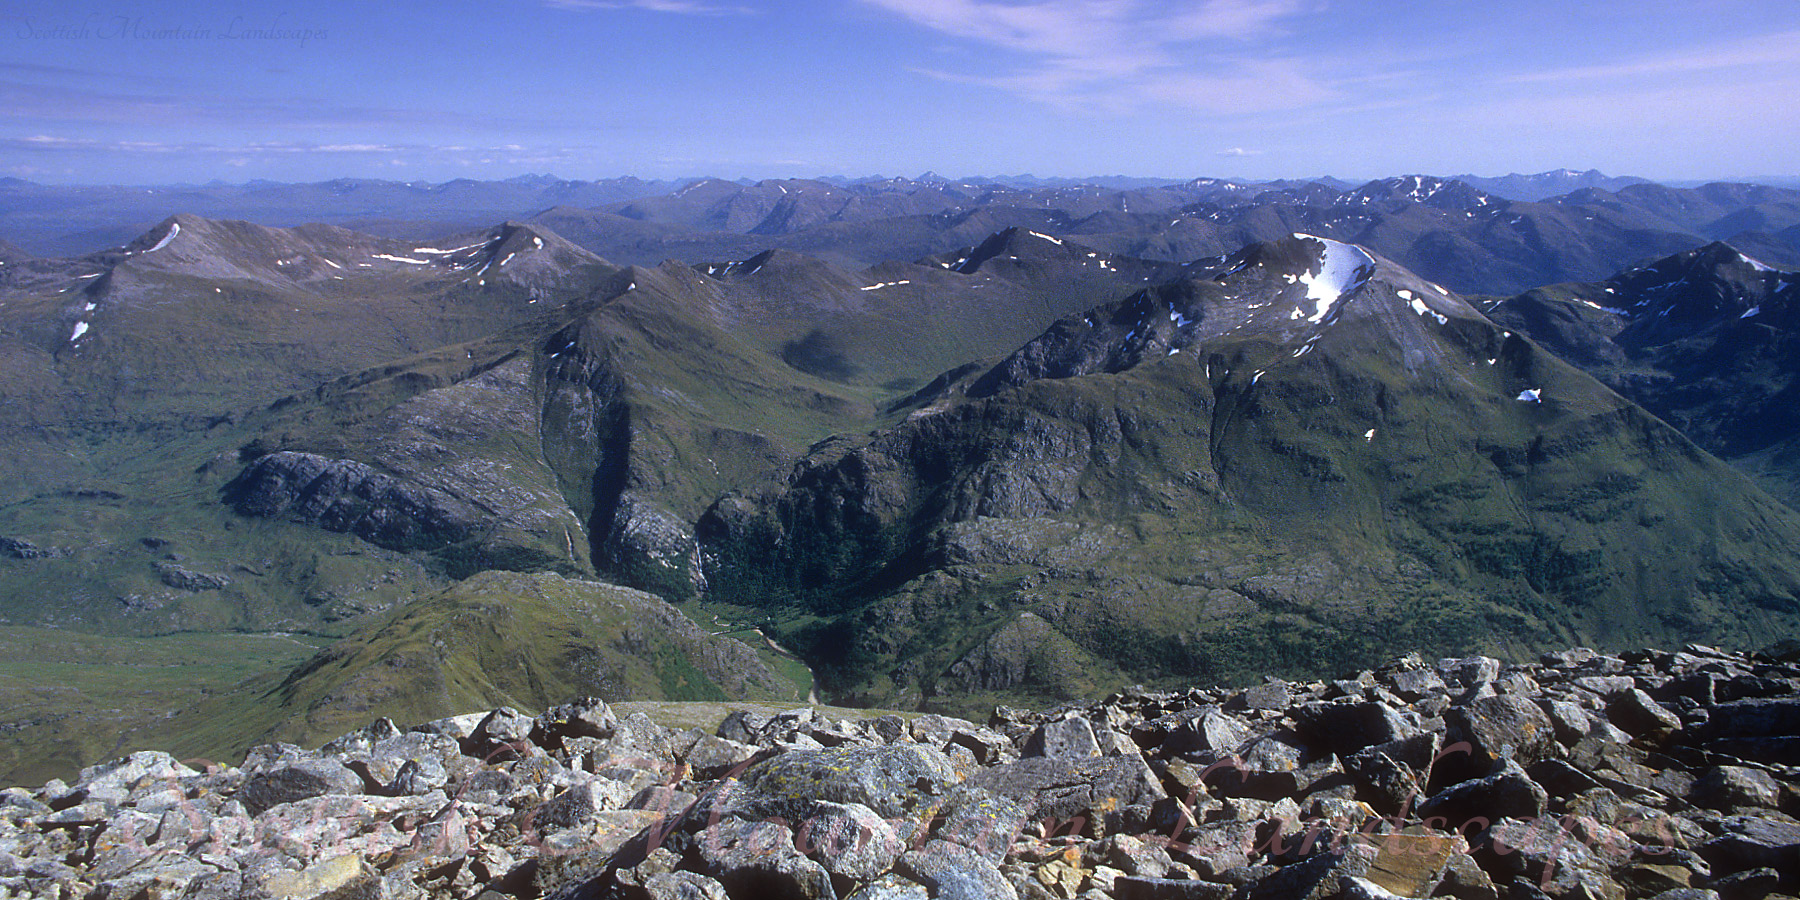 View south, from the summit of Ben Nevis.